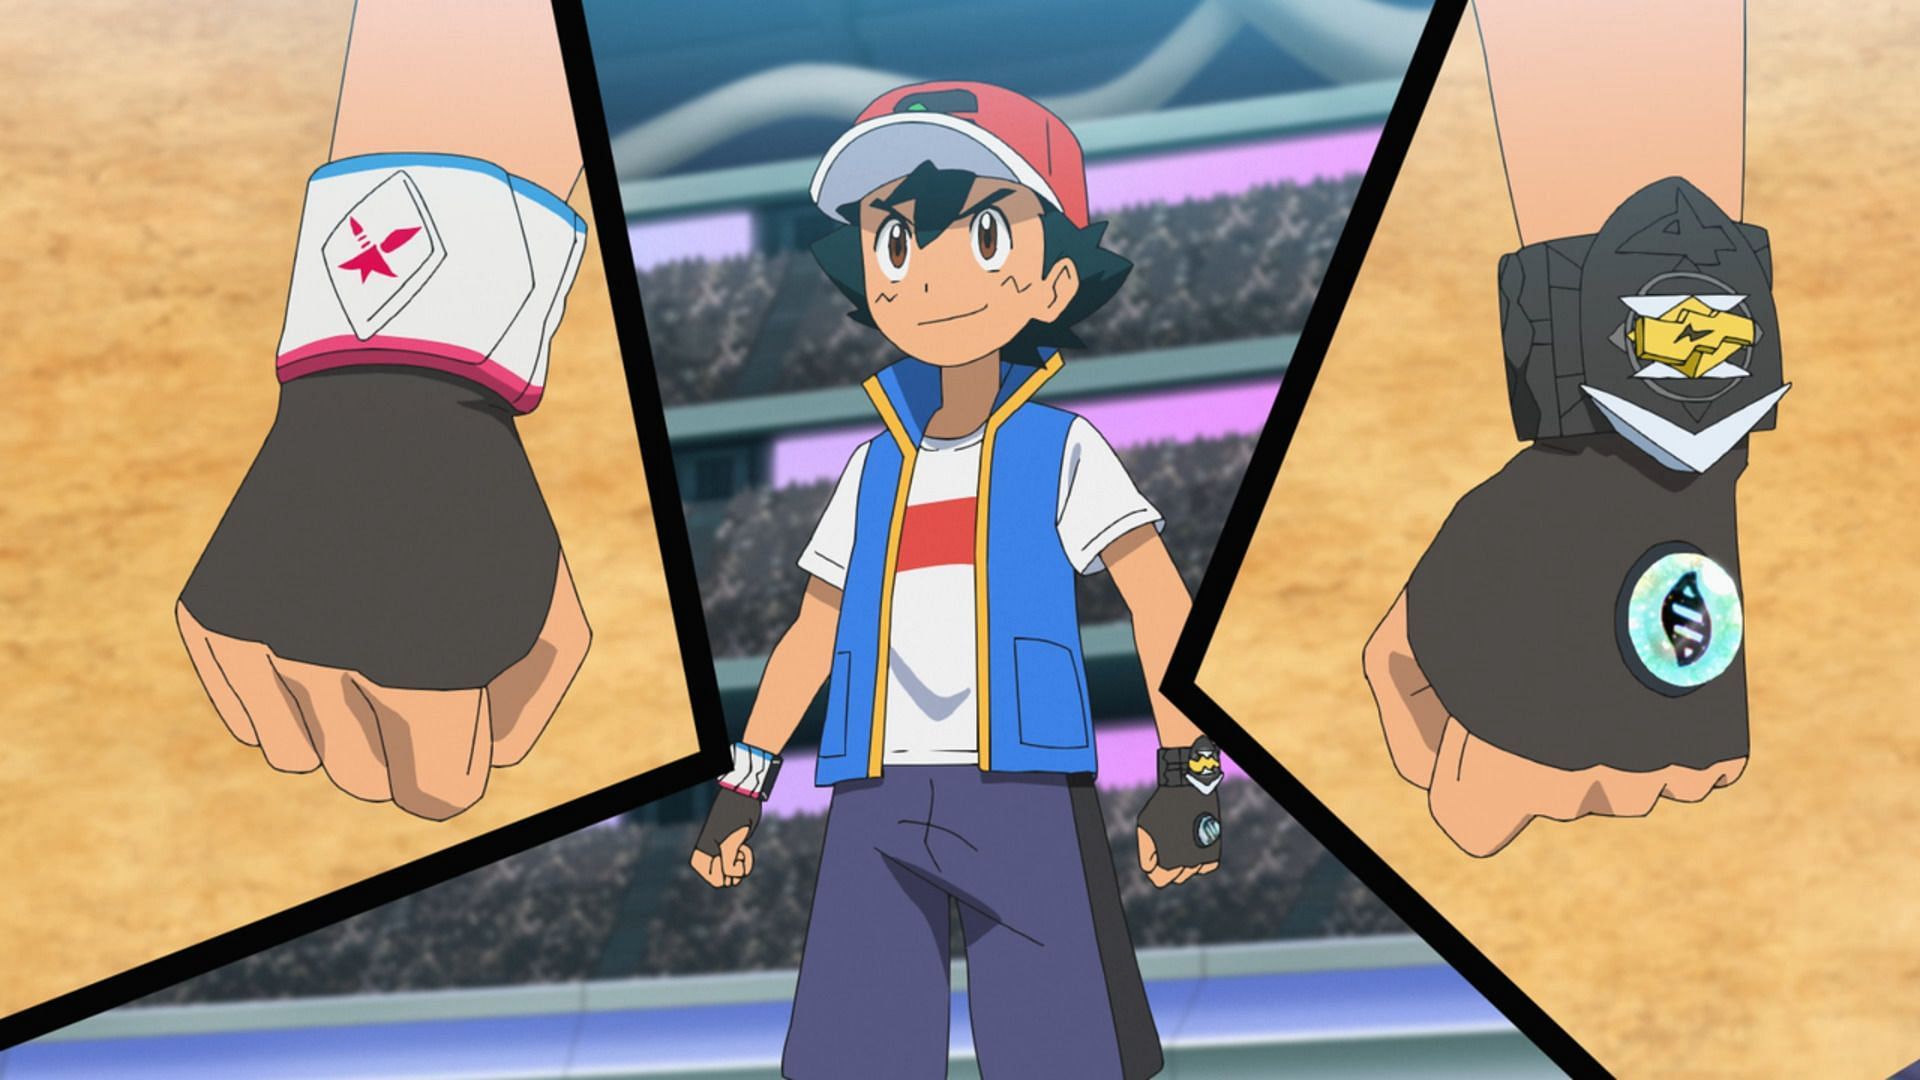 Ash with various battle gimmick accessories in the anime